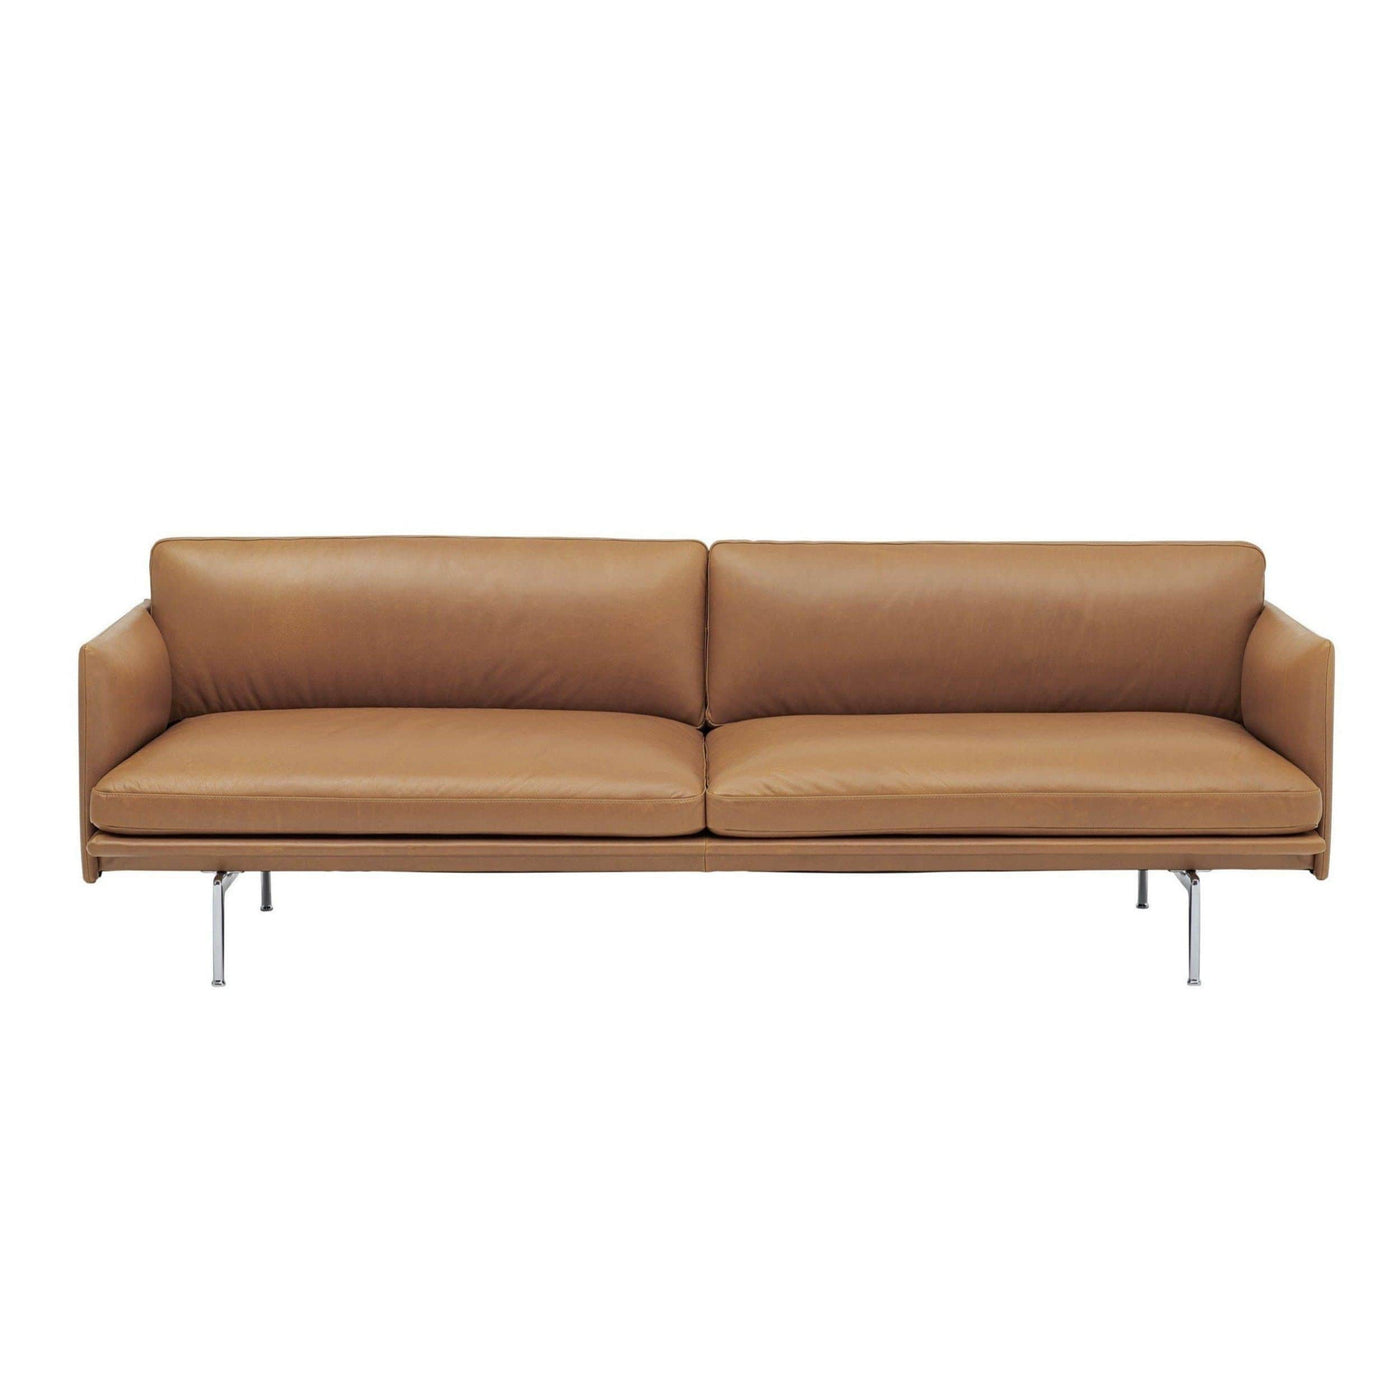 Muuto Outline 3 seater sofa with polished aluminium legs. Available from someday designs. #colour_cognac-refine-leather